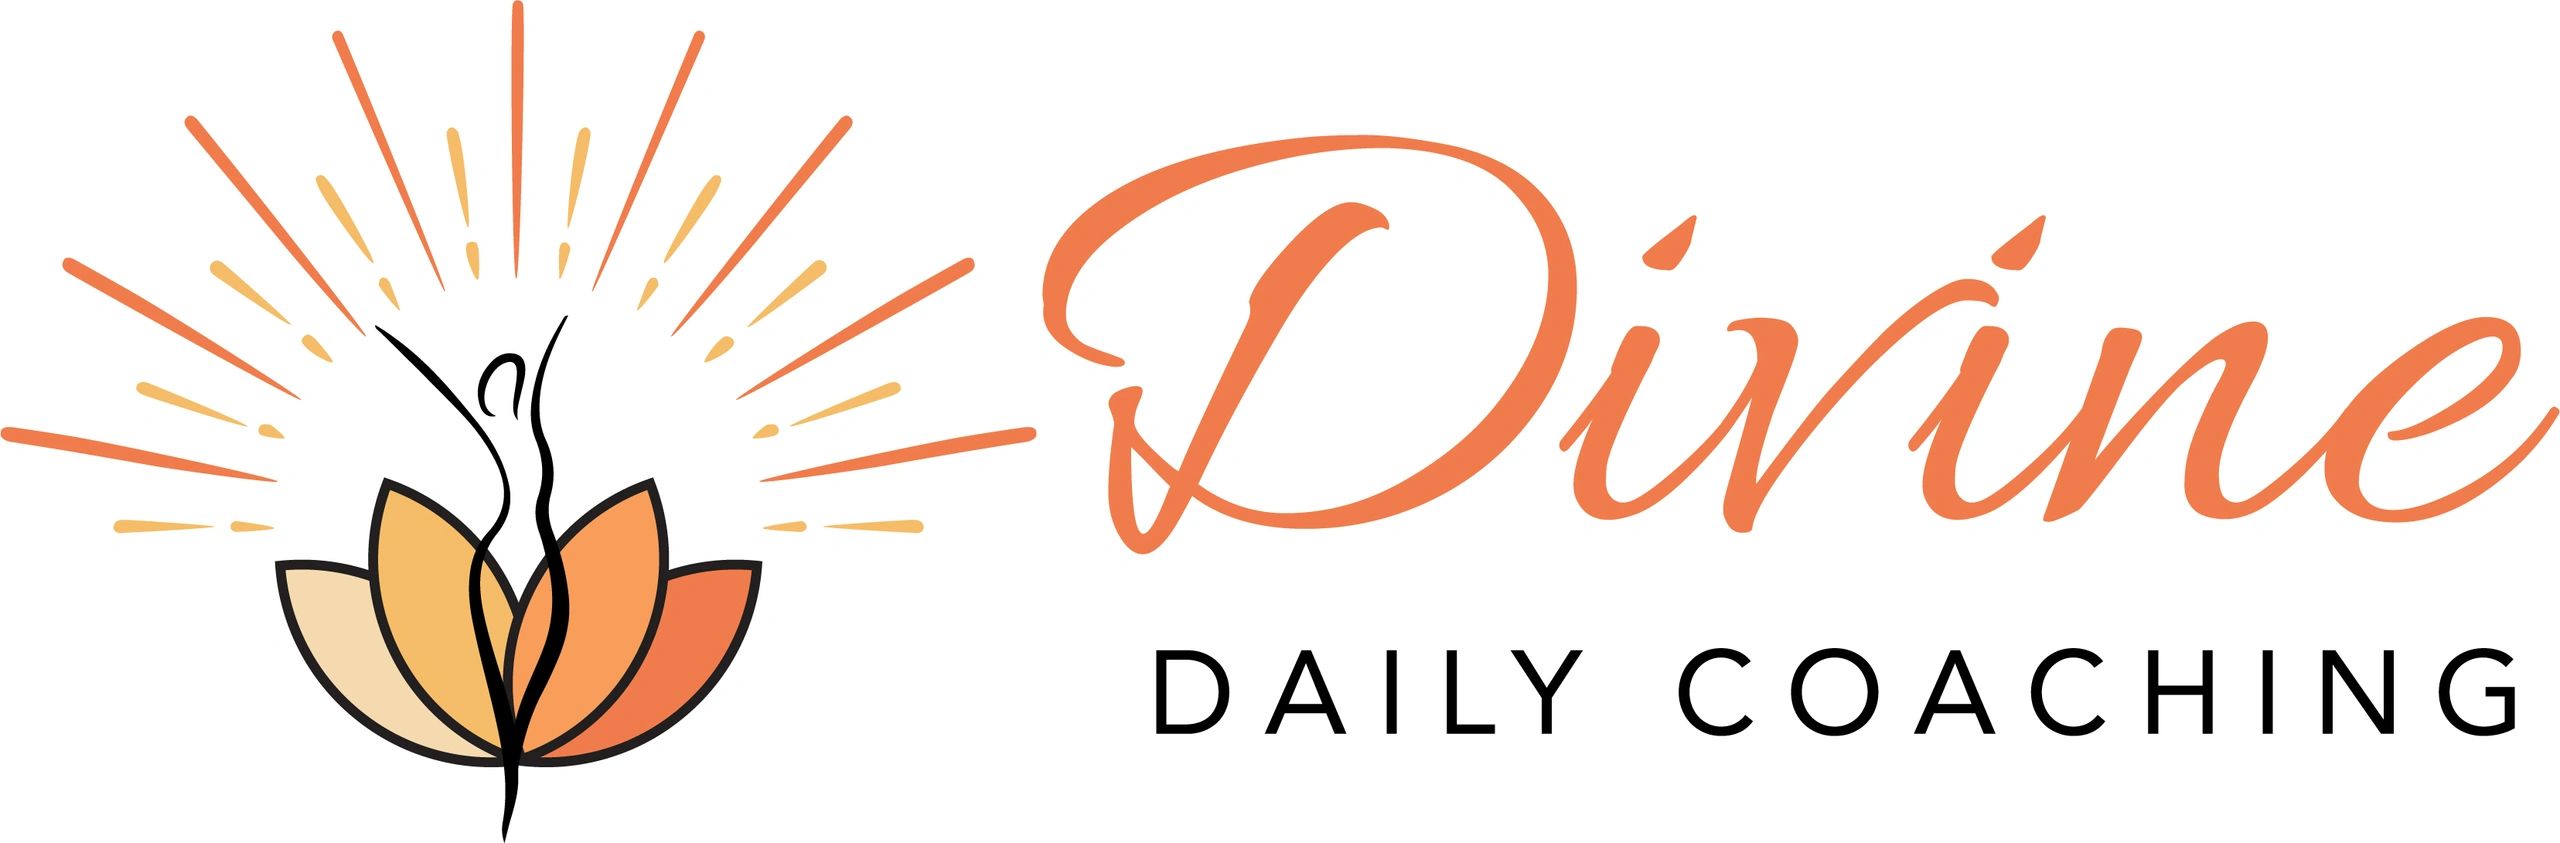 Divine Daily™ Coaching - Life Coaching, Couples Counselling, Coaching,  Hypnotherapy, Neuro Linguistic Programming, Matrix Therapies